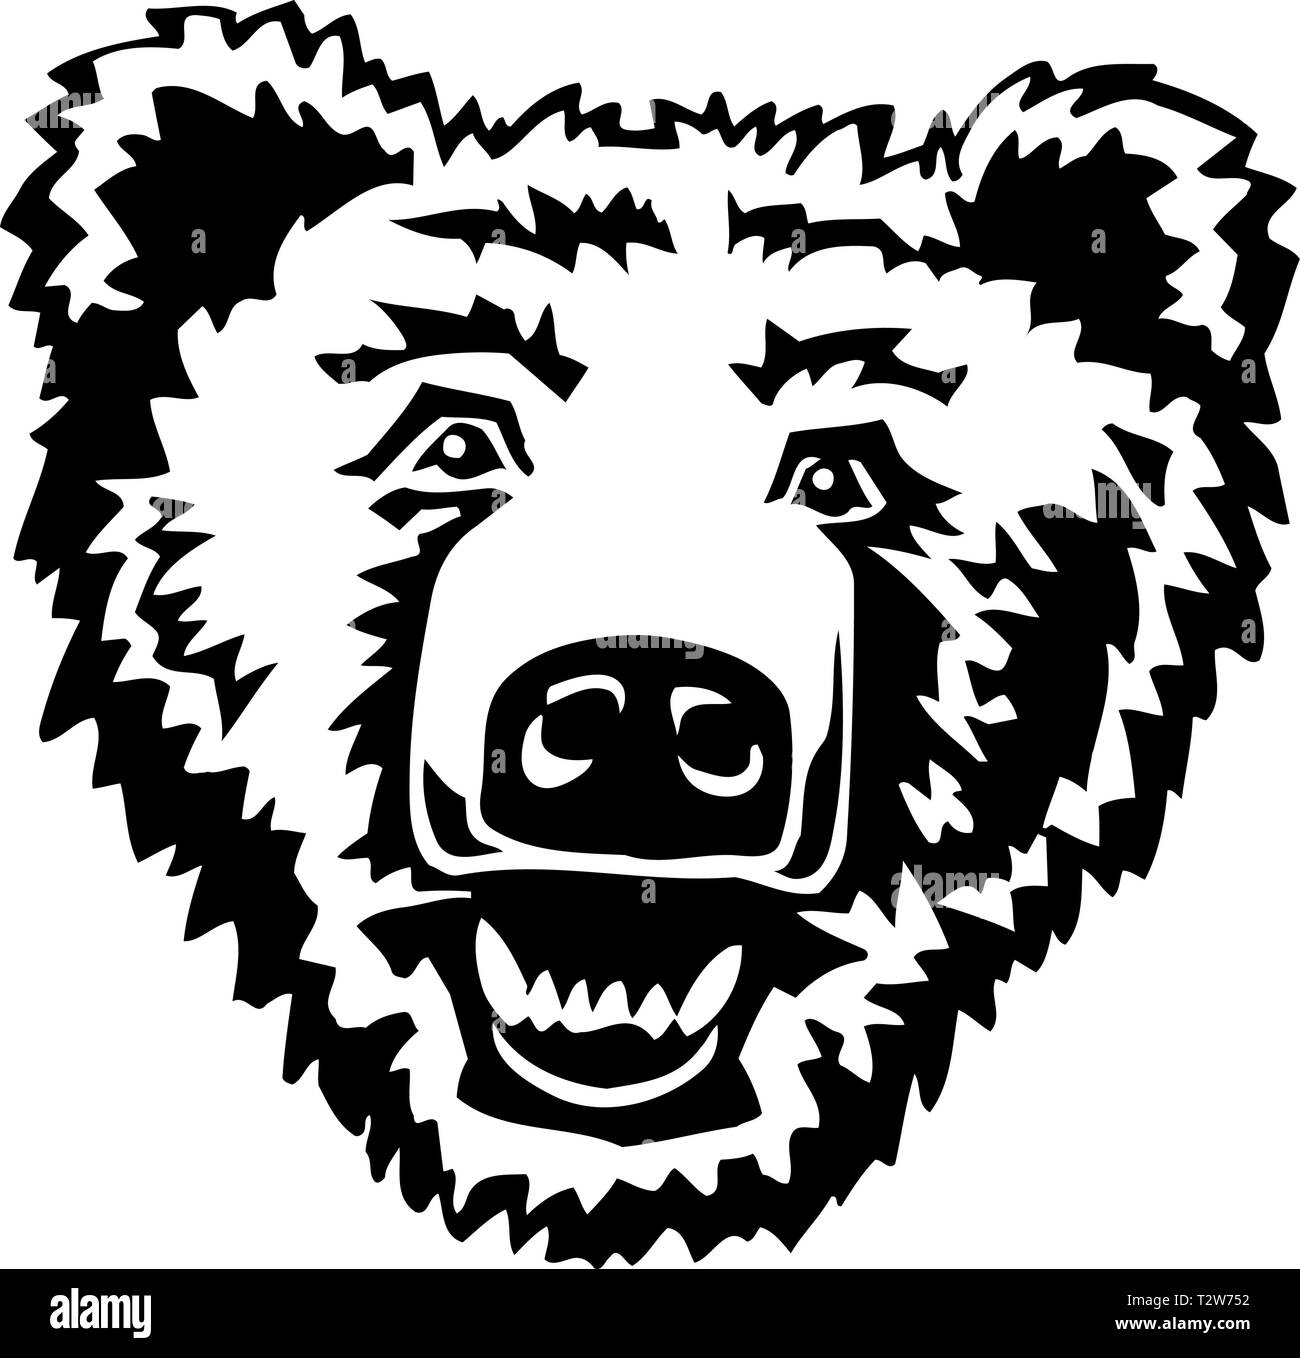 Bears face Black and White Stock Photos & Images - Alamy